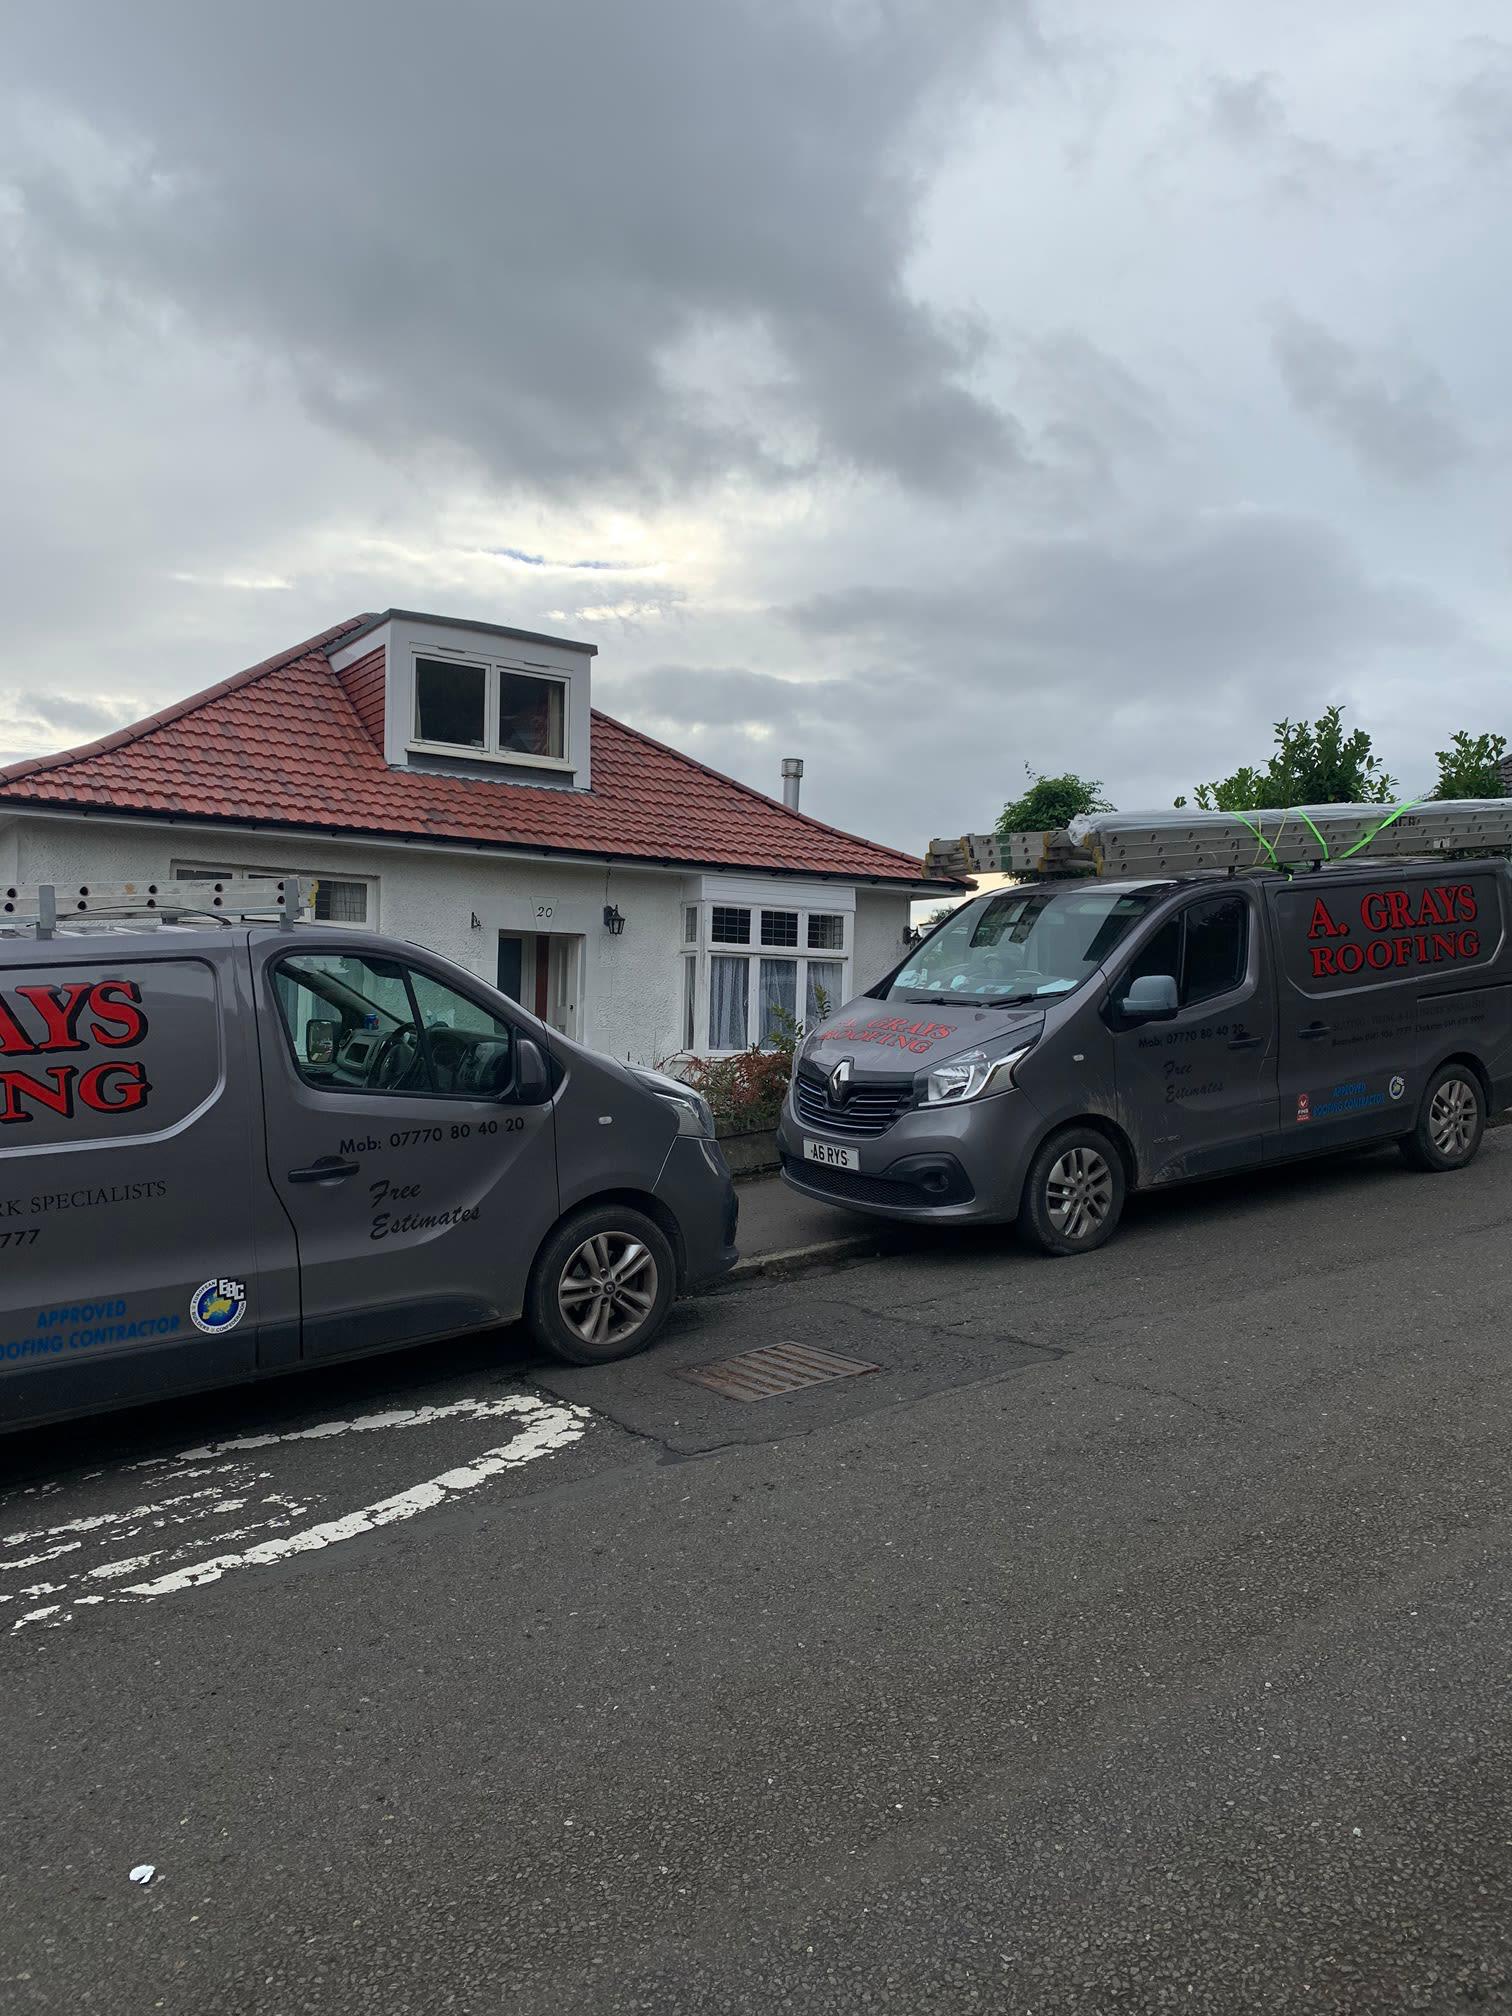 A Grays Roofing Glasgow 01419 567777